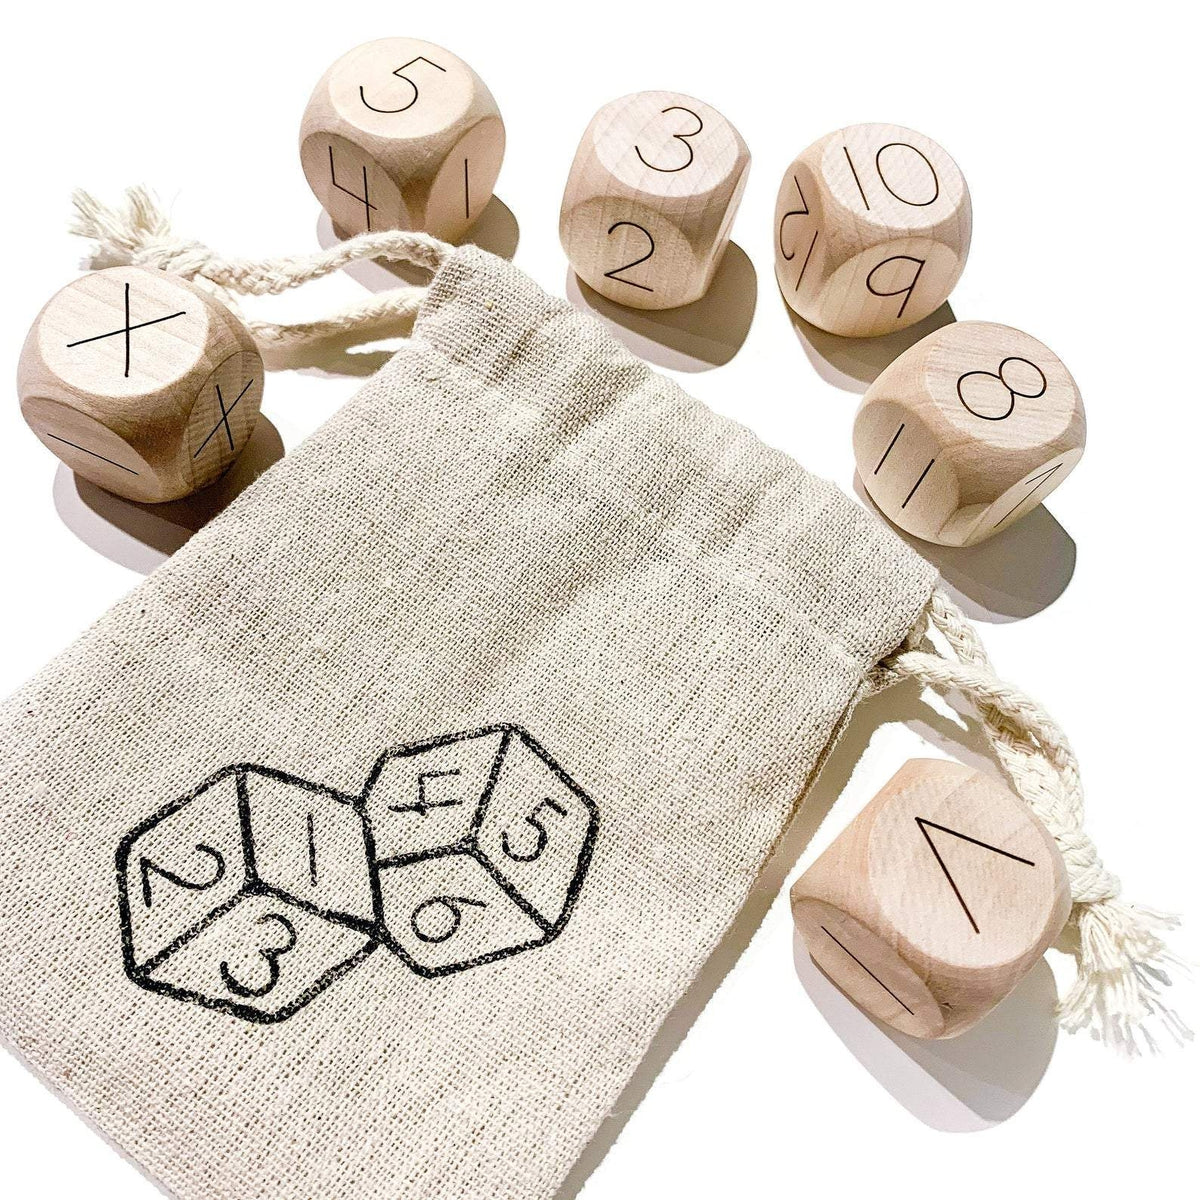  Homotte Wooden Yoga Dice Set for Kids, Fun Workout Game with 6  Exercise Dice, 12 Yoga Cards & Gift Box, Mindfulness Yoga Gifts for Girls &  Beginners : Sports & Outdoors